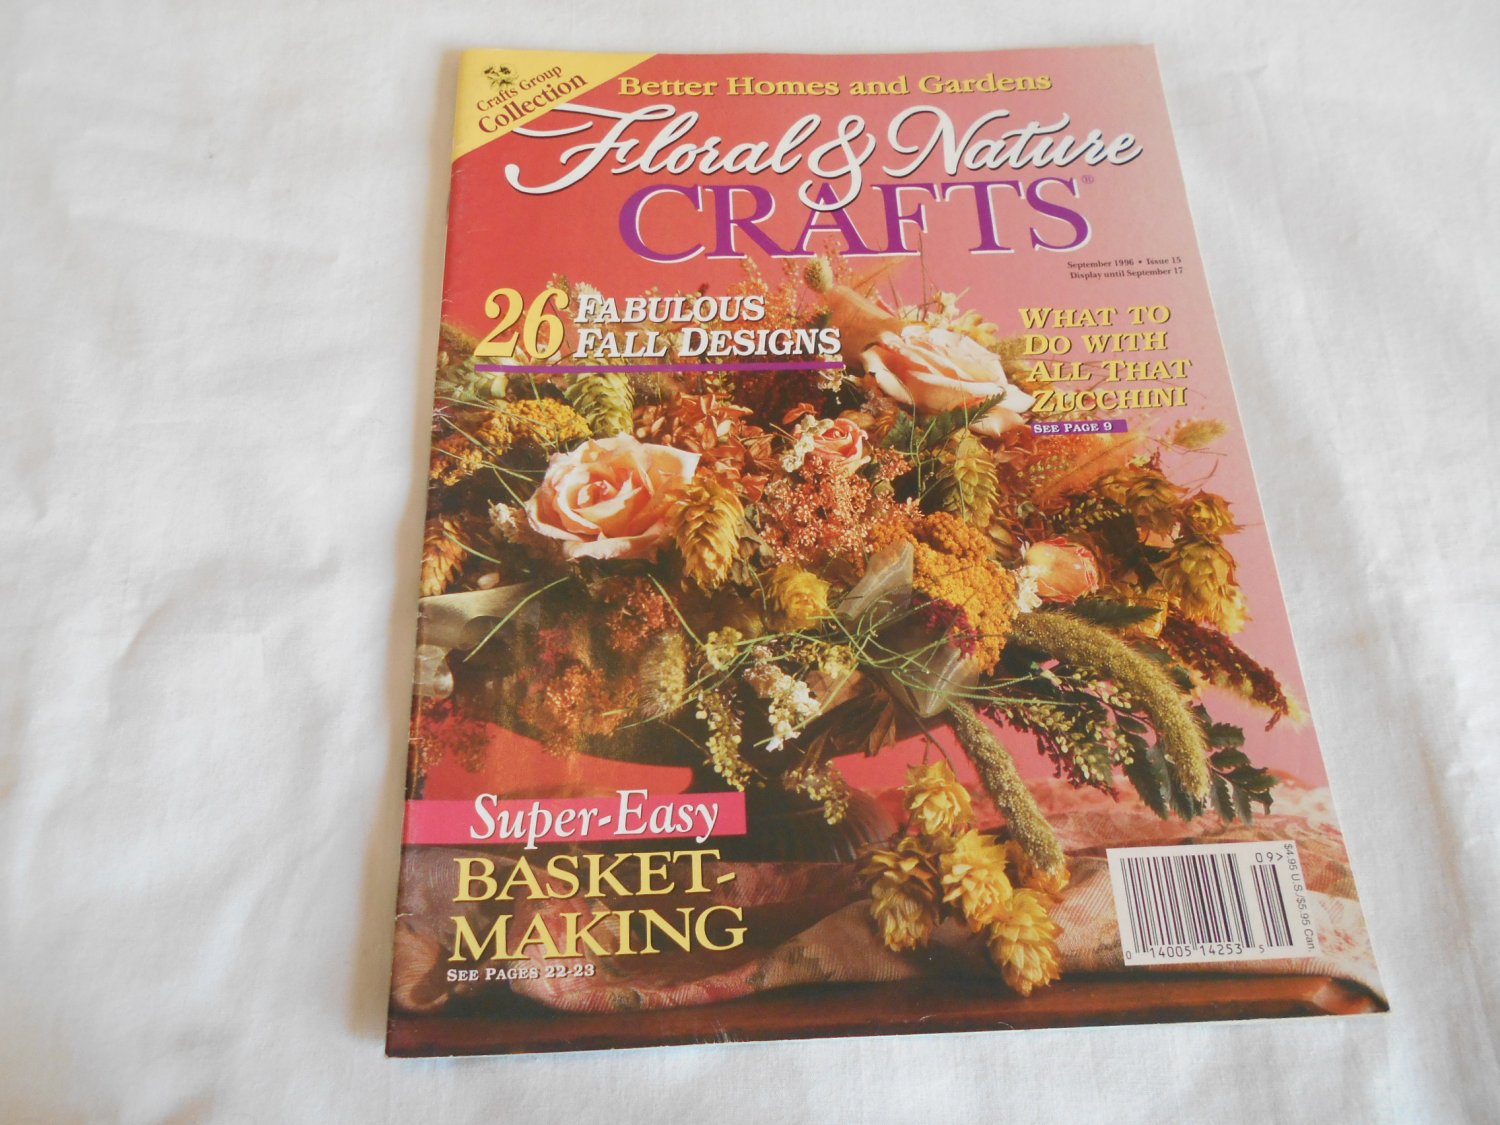 Better Homes and Gardens Floral & Nature Crafts September 1996 Issue 15